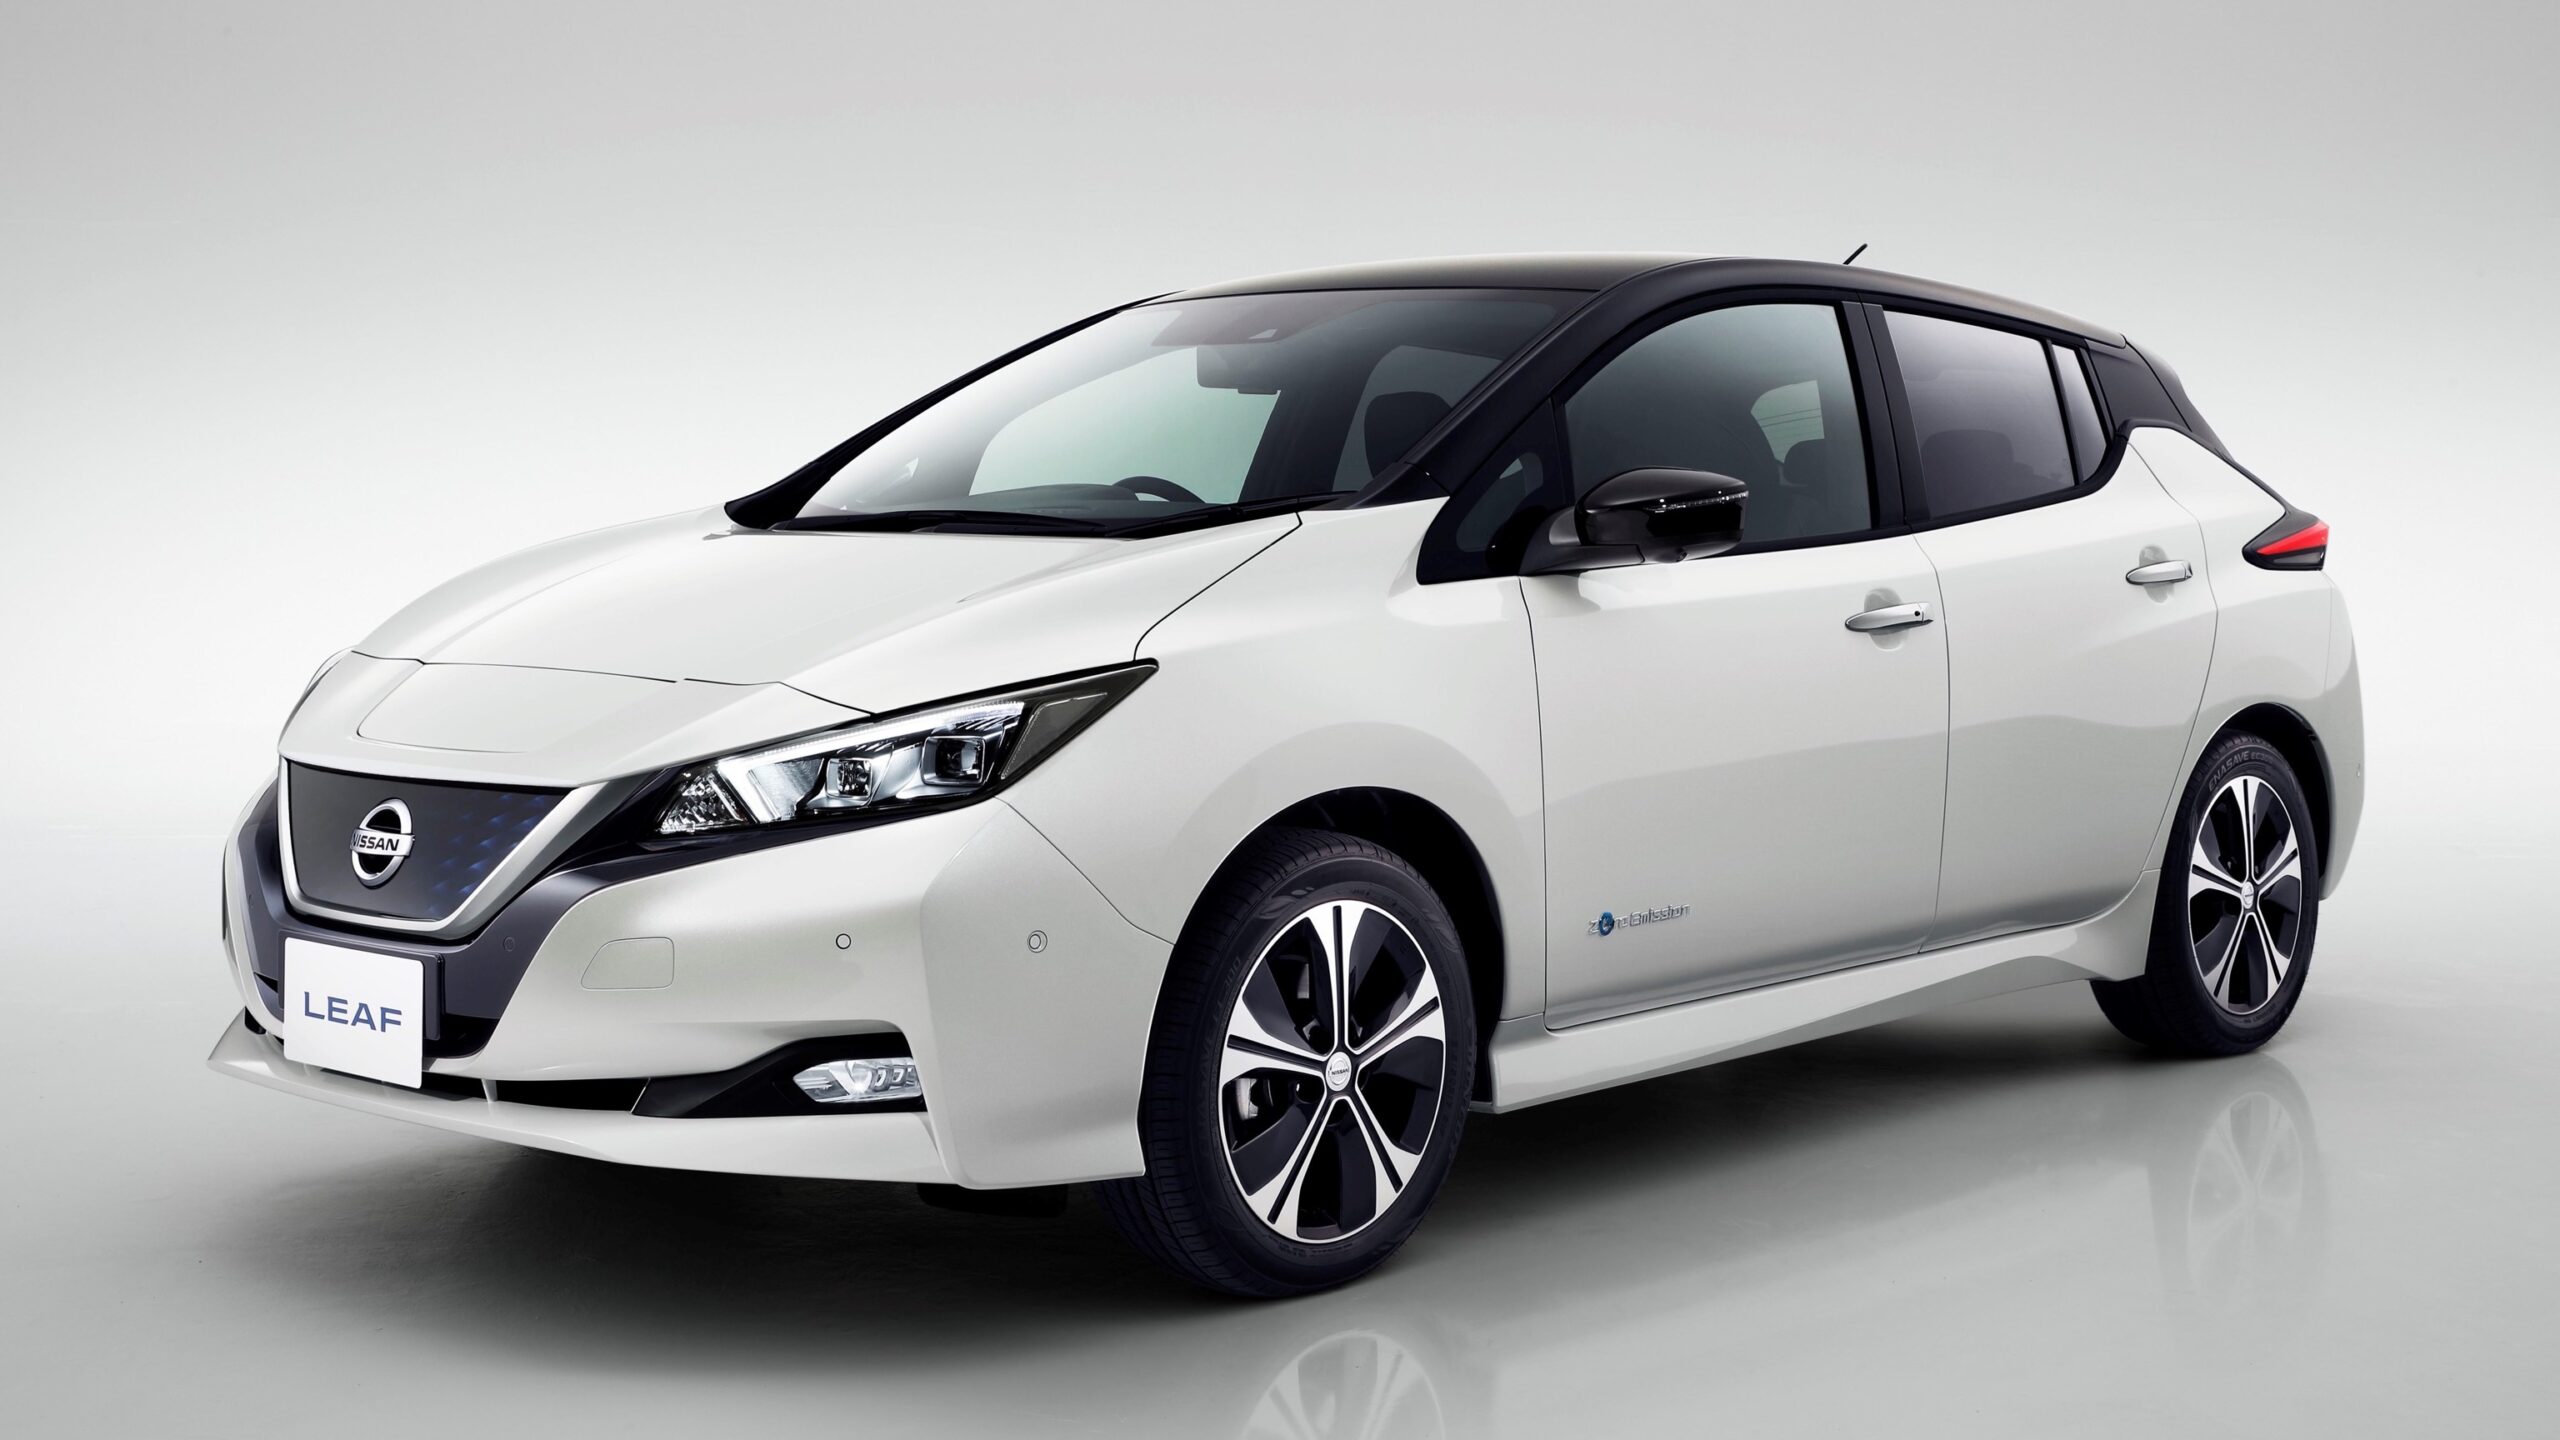 Nissan Leaf 1 scaled - Nissan Leaf Price and Specifications [Infographic]